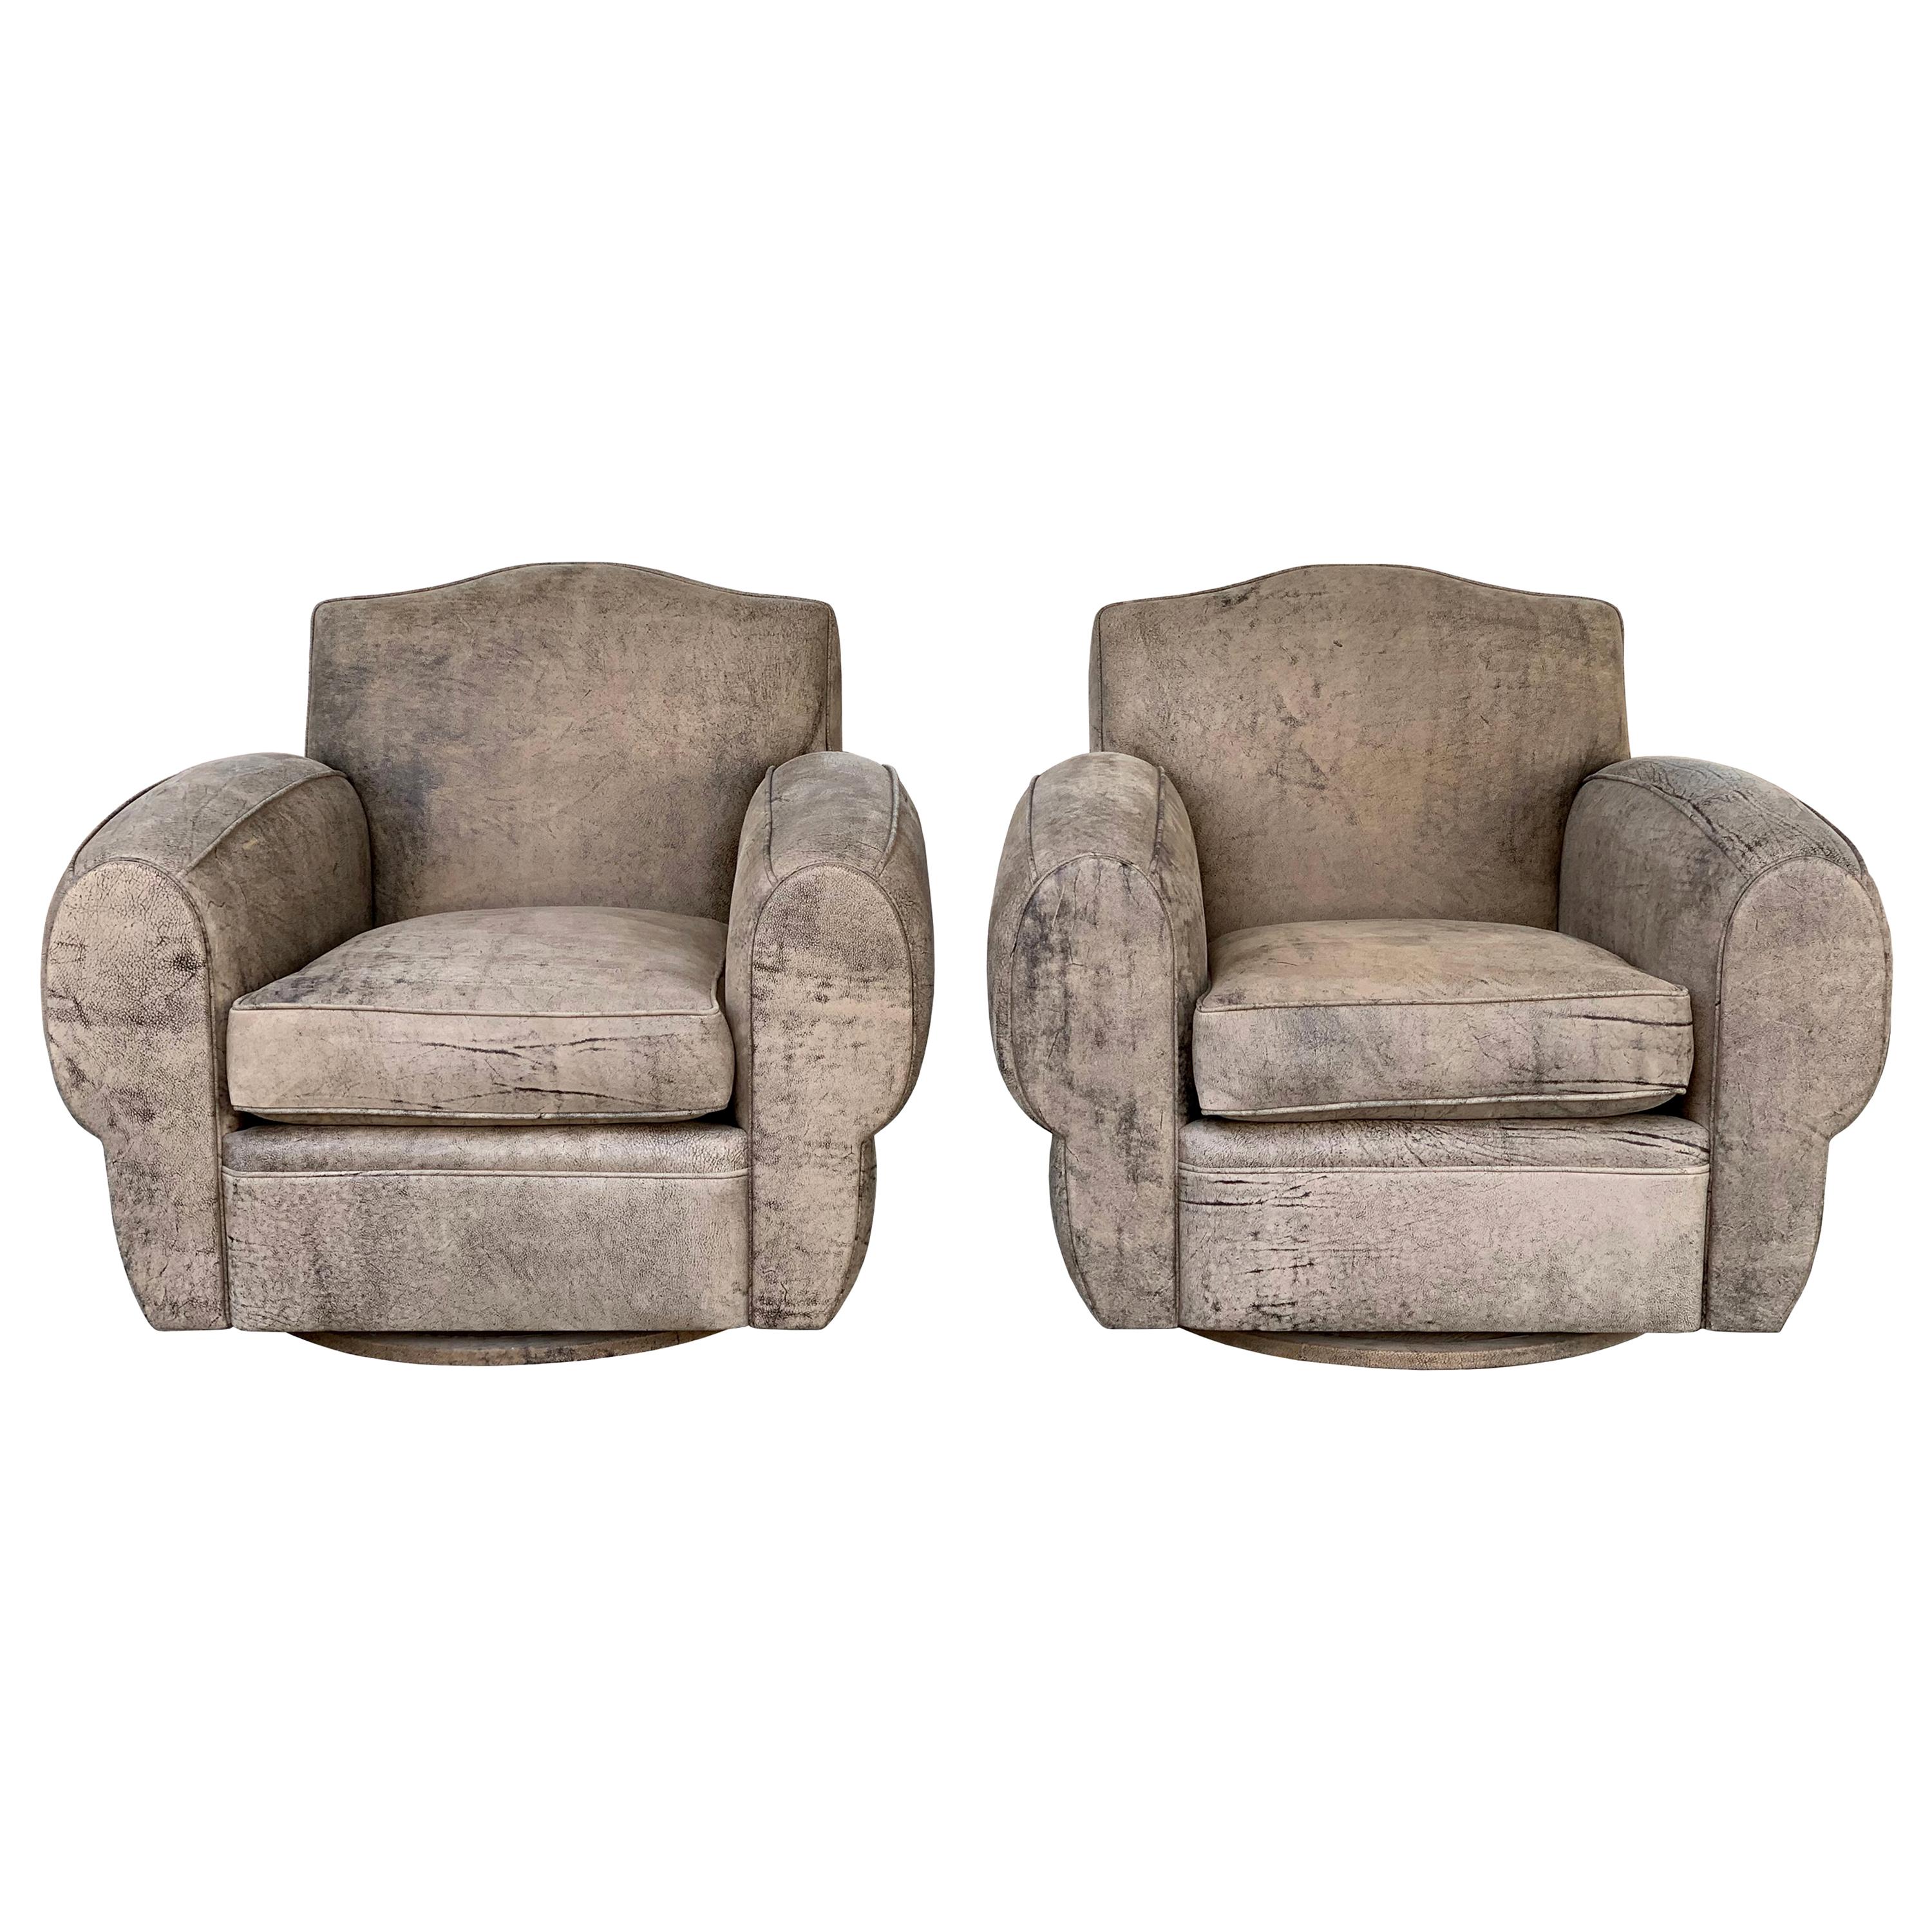 Stunning Pair of Deco Style Armchairs Upholstered in Elephant Print Leather